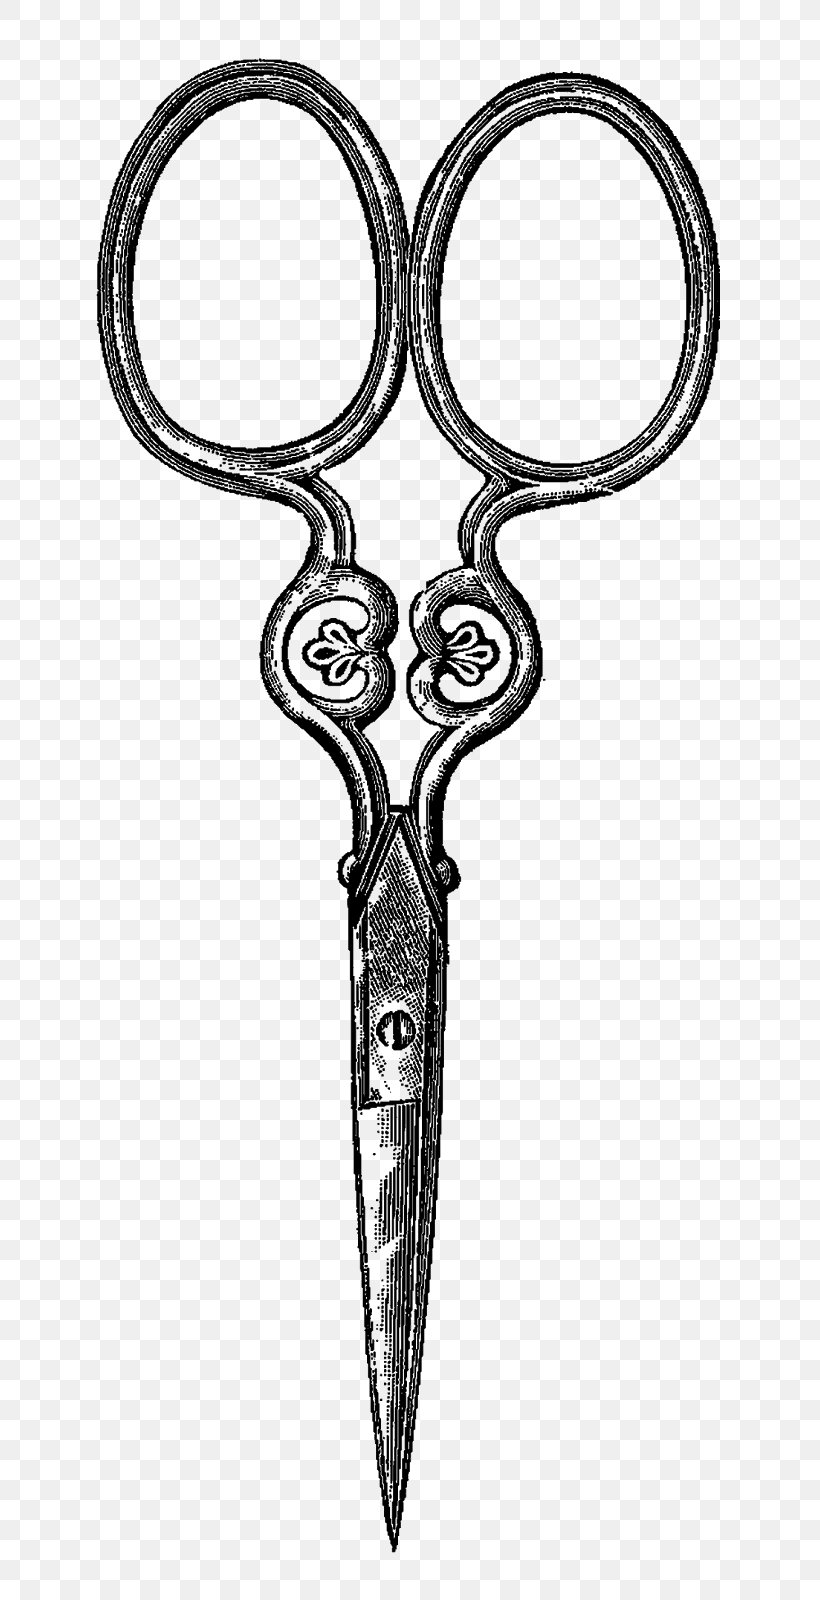 Scissors Sketch Stock Photos and Images  123RF